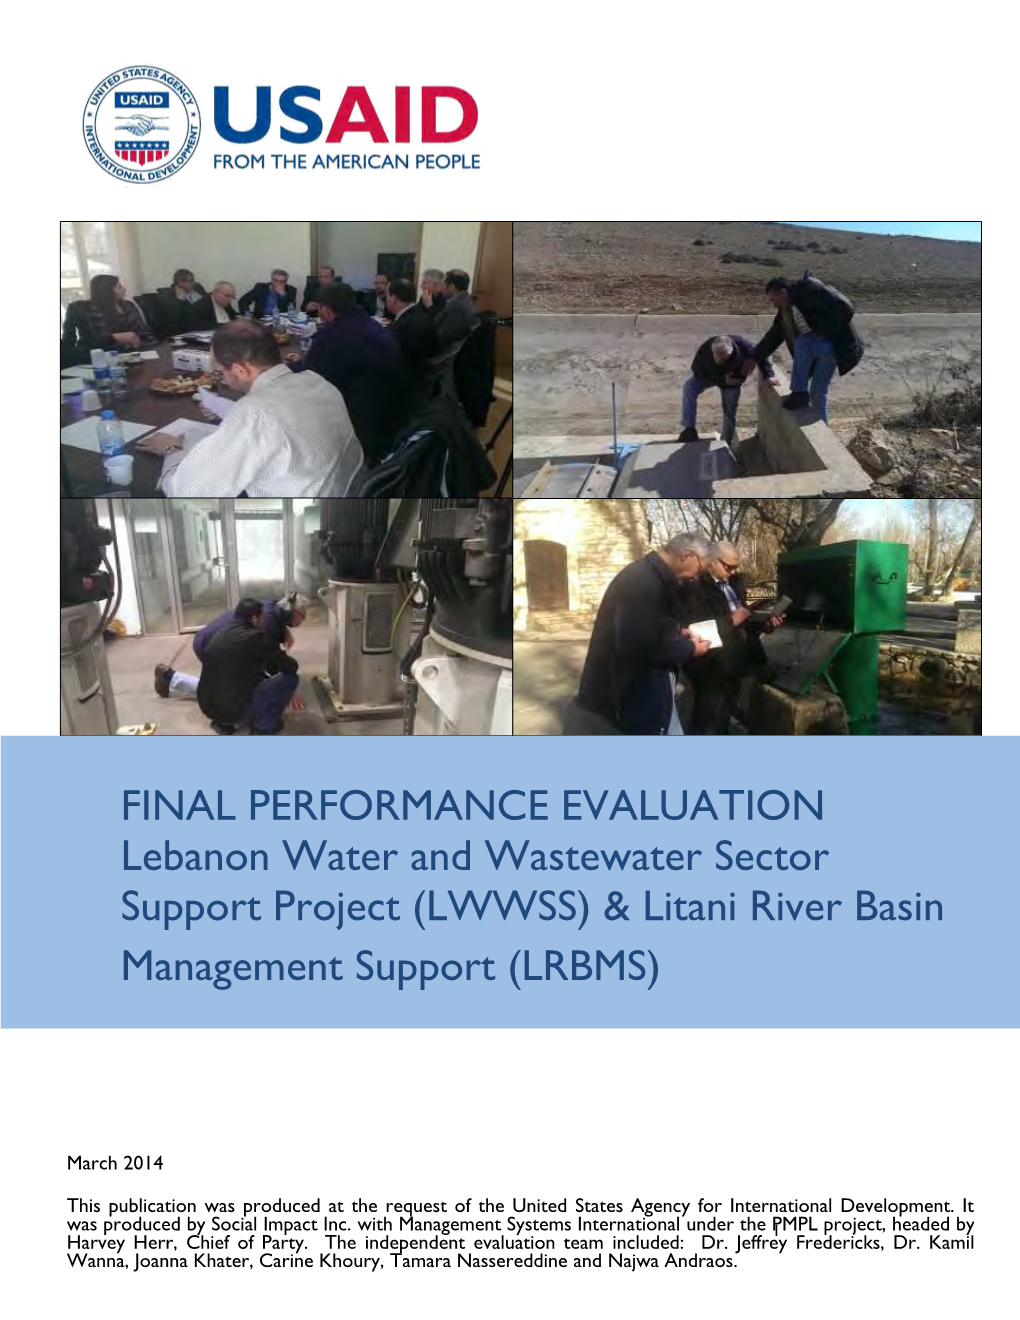 FINAL PERFORMANCE EVALUATION Lebanon Water and Wastewater Sector Support Project (LWWSS) & Litani River Basin Management Support (LRBMS)